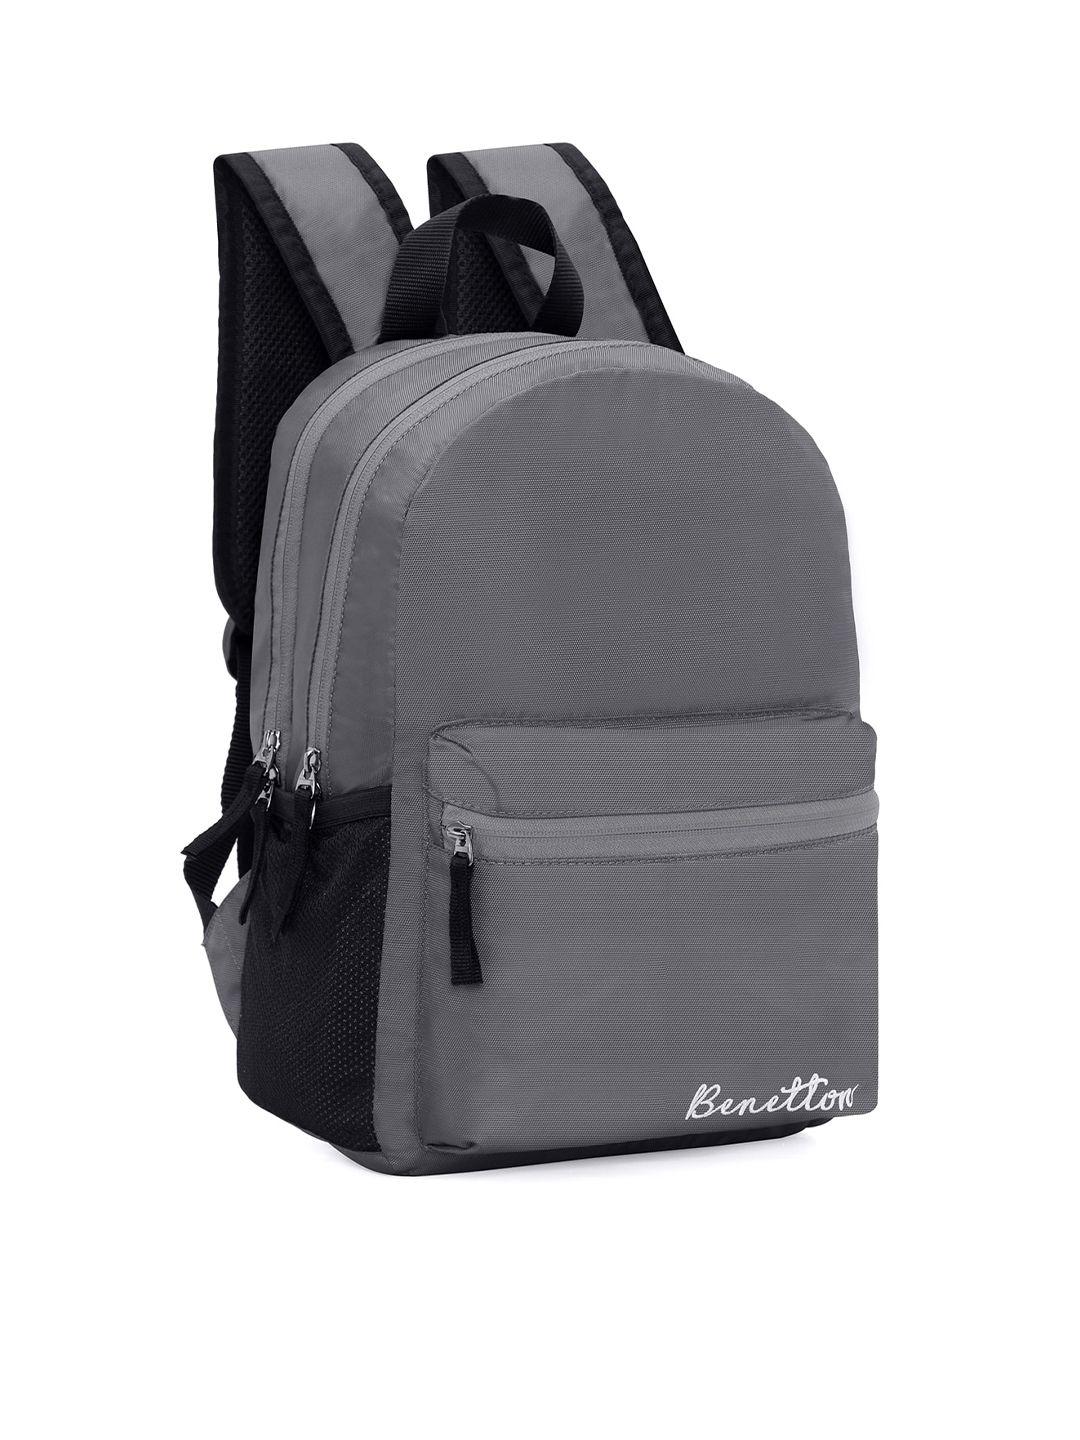 united colors of benetton unisex backpack